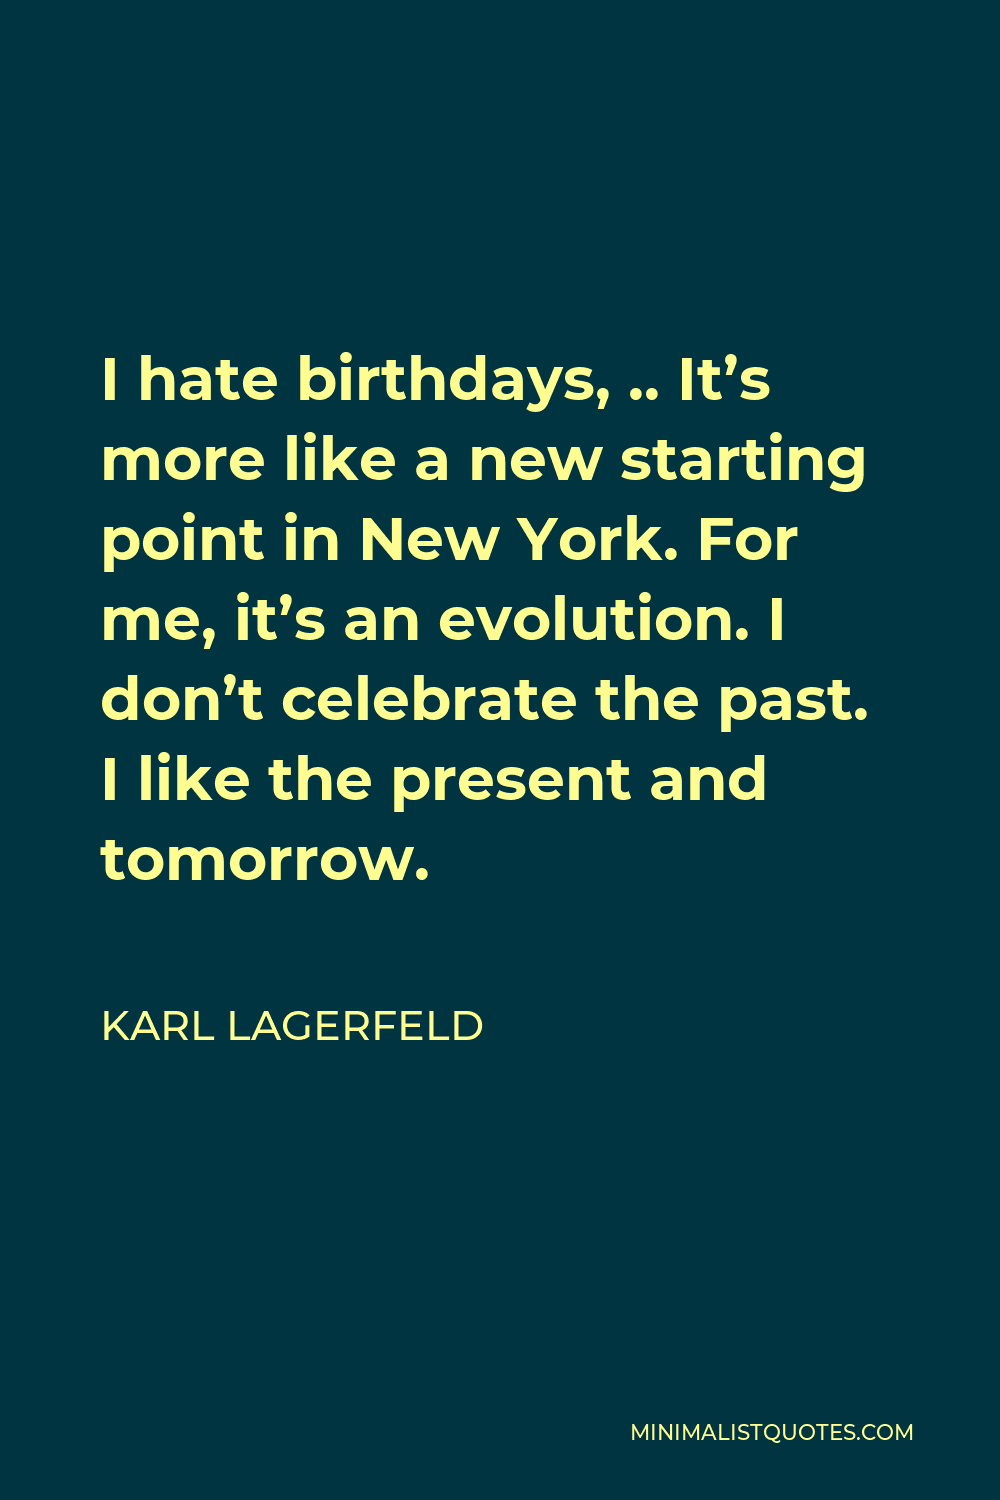 Karl Lagerfeld Quote - I hate birthdays, .. It’s more like a new starting point in New York. For me, it’s an evolution. I don’t celebrate the past. I like the present and tomorrow.